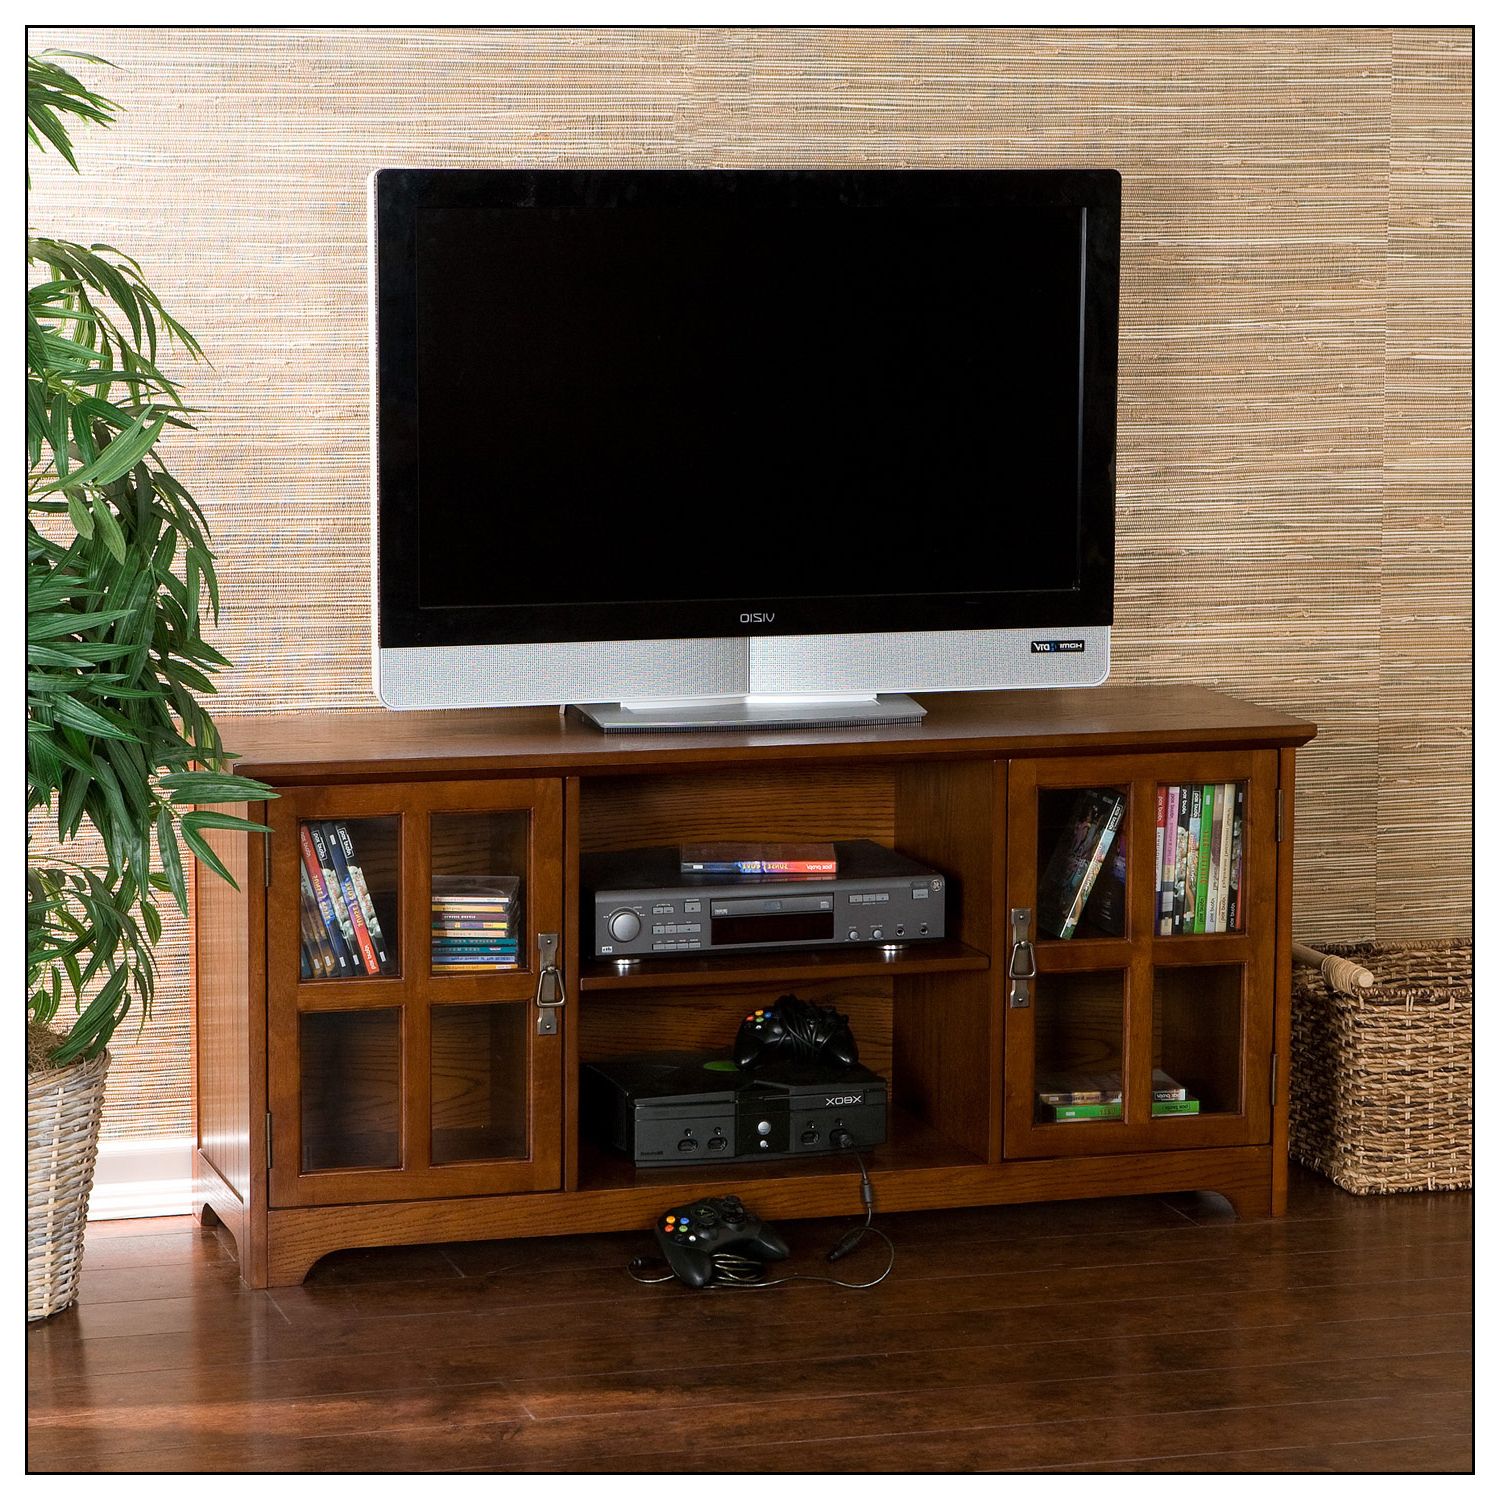 Glass Shelves Tv Stands For Tvs Up To 50" Pertaining To Most Recent Sei Tv Stand For Most Flat Panel Tvs Up To 50" Mission Oak (View 8 of 10)